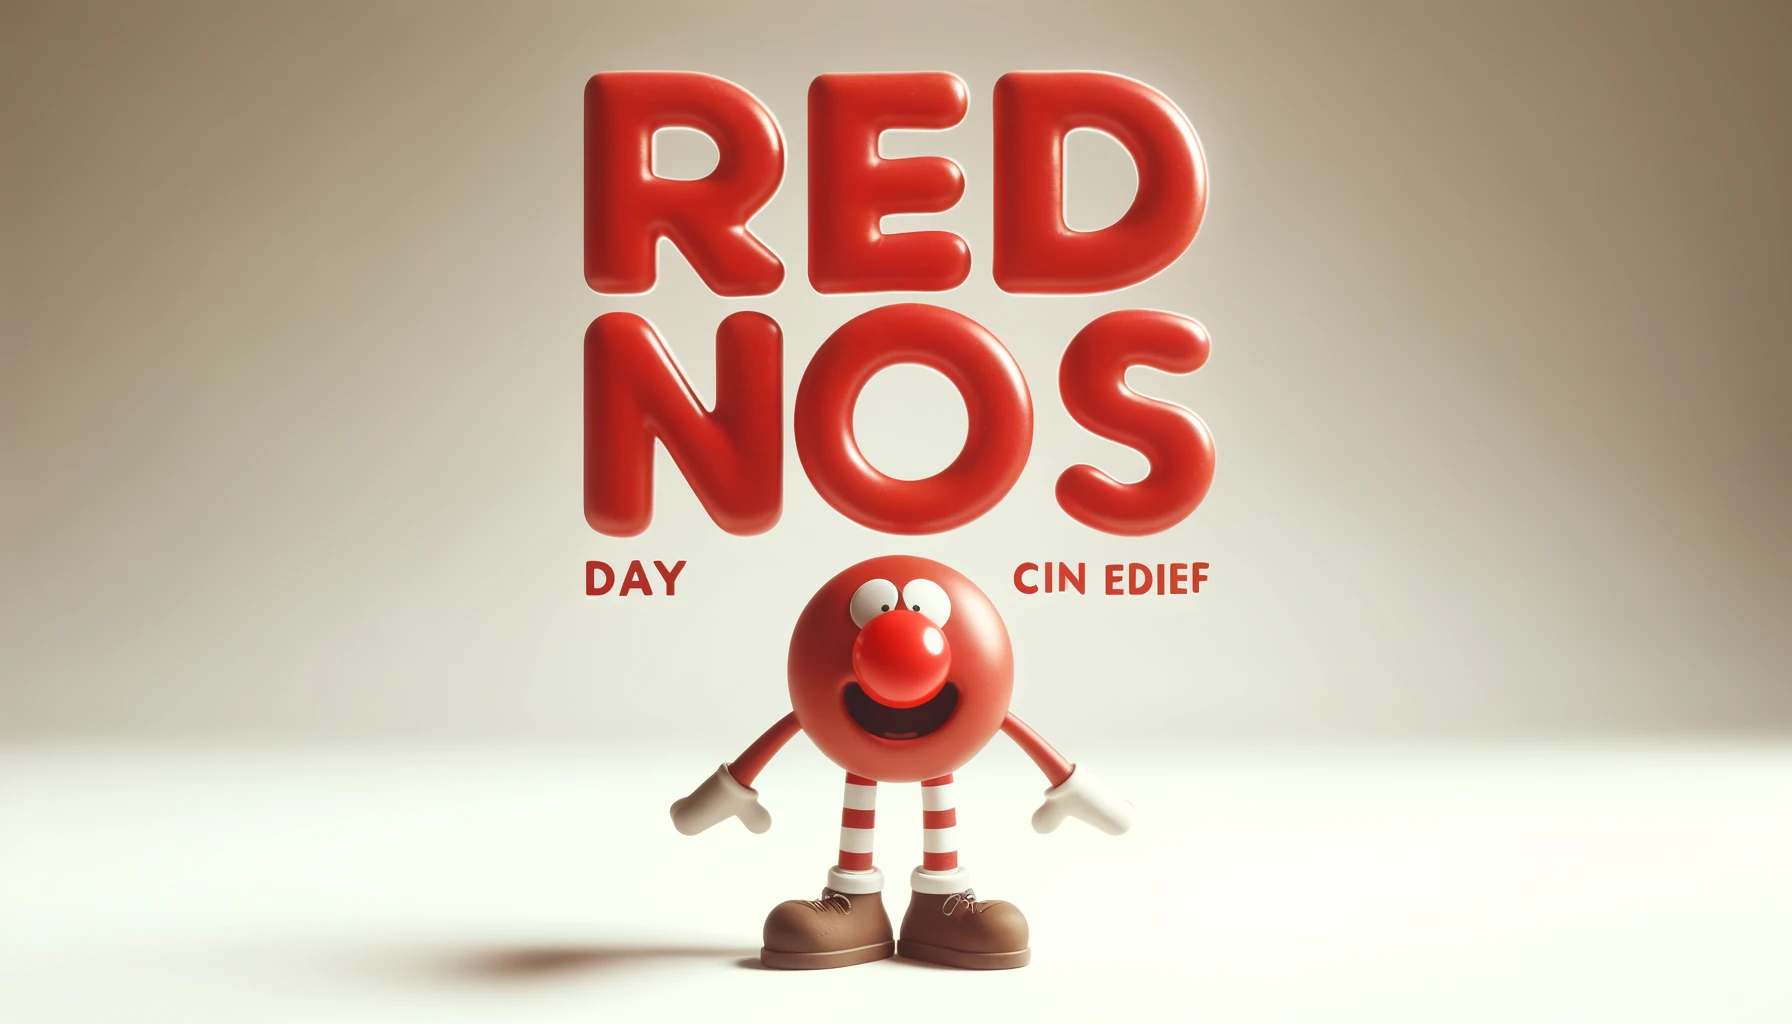 Comic Relief Messages: Celebrate Red Nose Day with a Smile